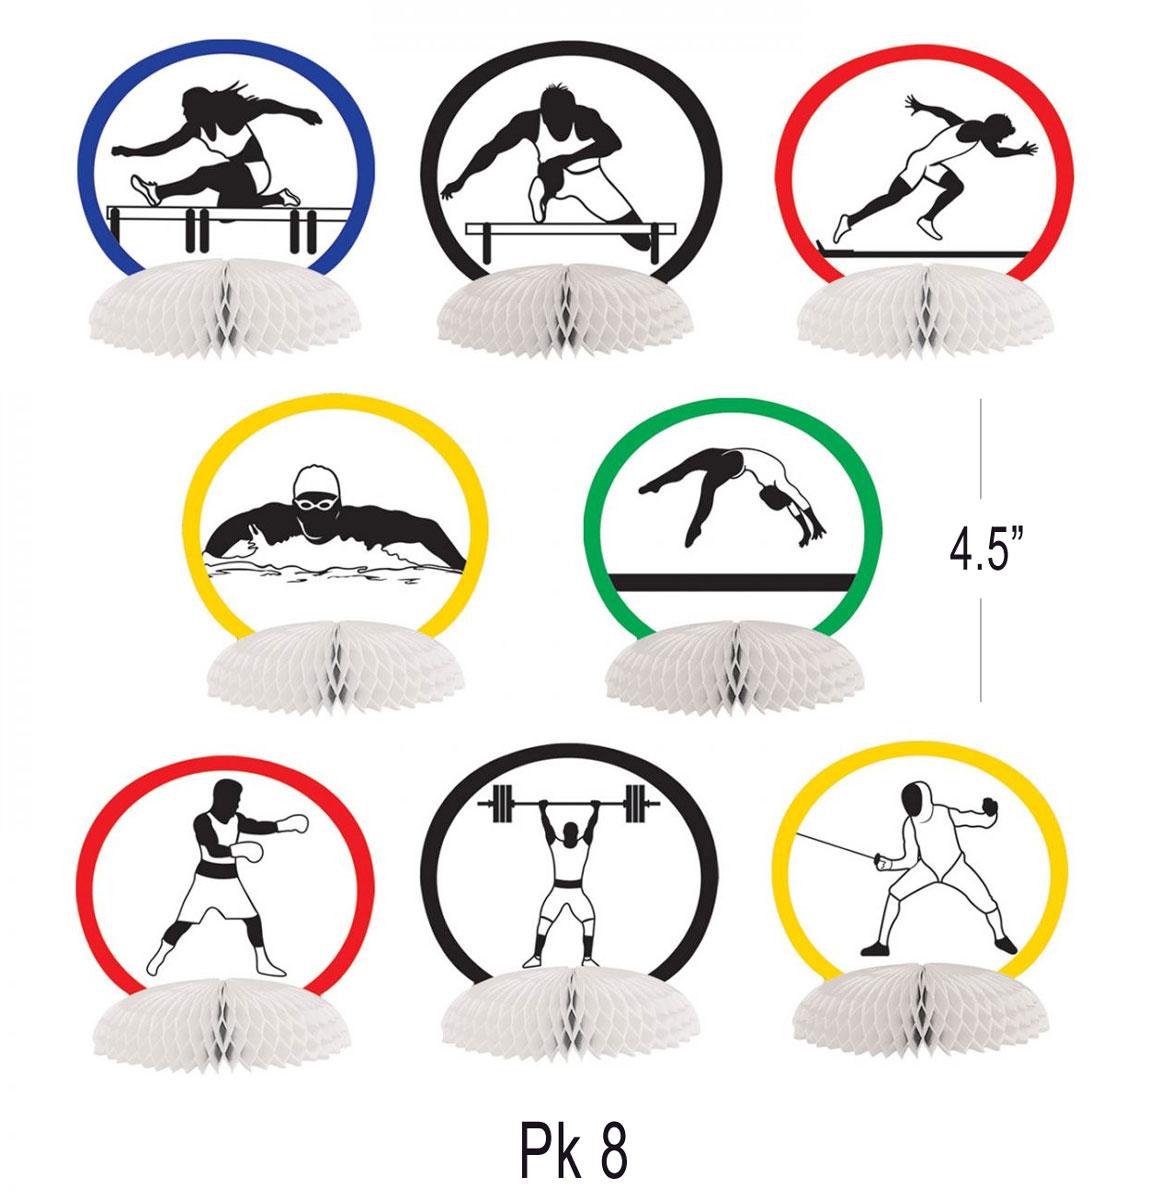 Summer sports or Olympic party tablecentre decorations - pack of 8 pieces 4.5" tall by Beistles 53453 available here at Karnival Costumes online party shop